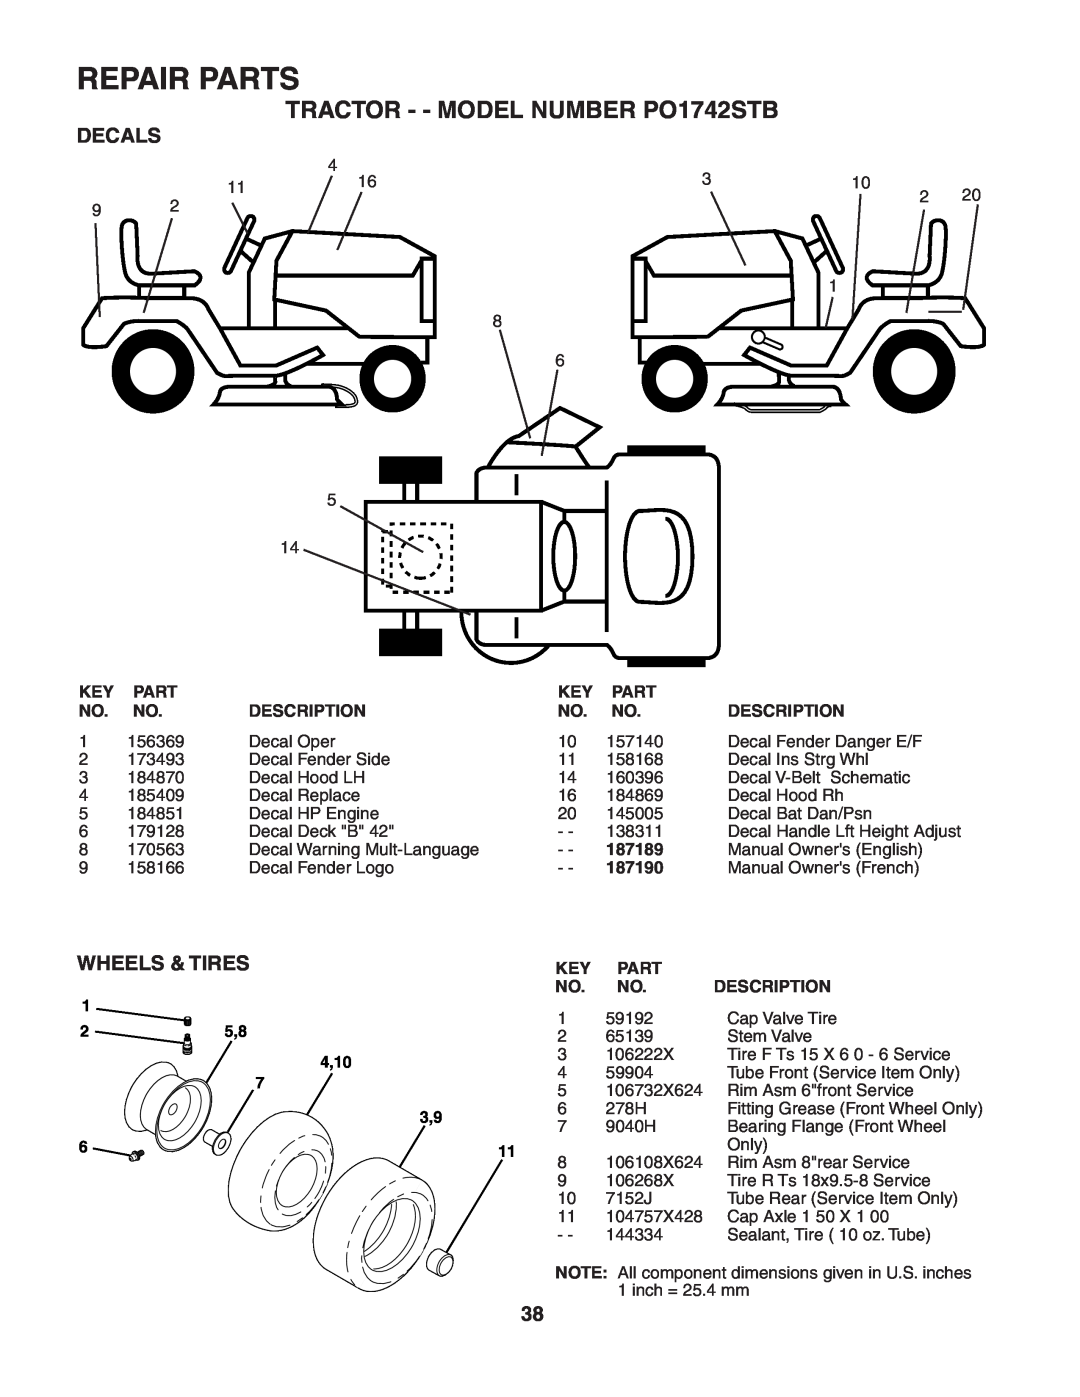 Poulan manual Decals, Wheels & Tires, Repair Parts, TRACTOR - - MODEL NUMBER PO1742STB 